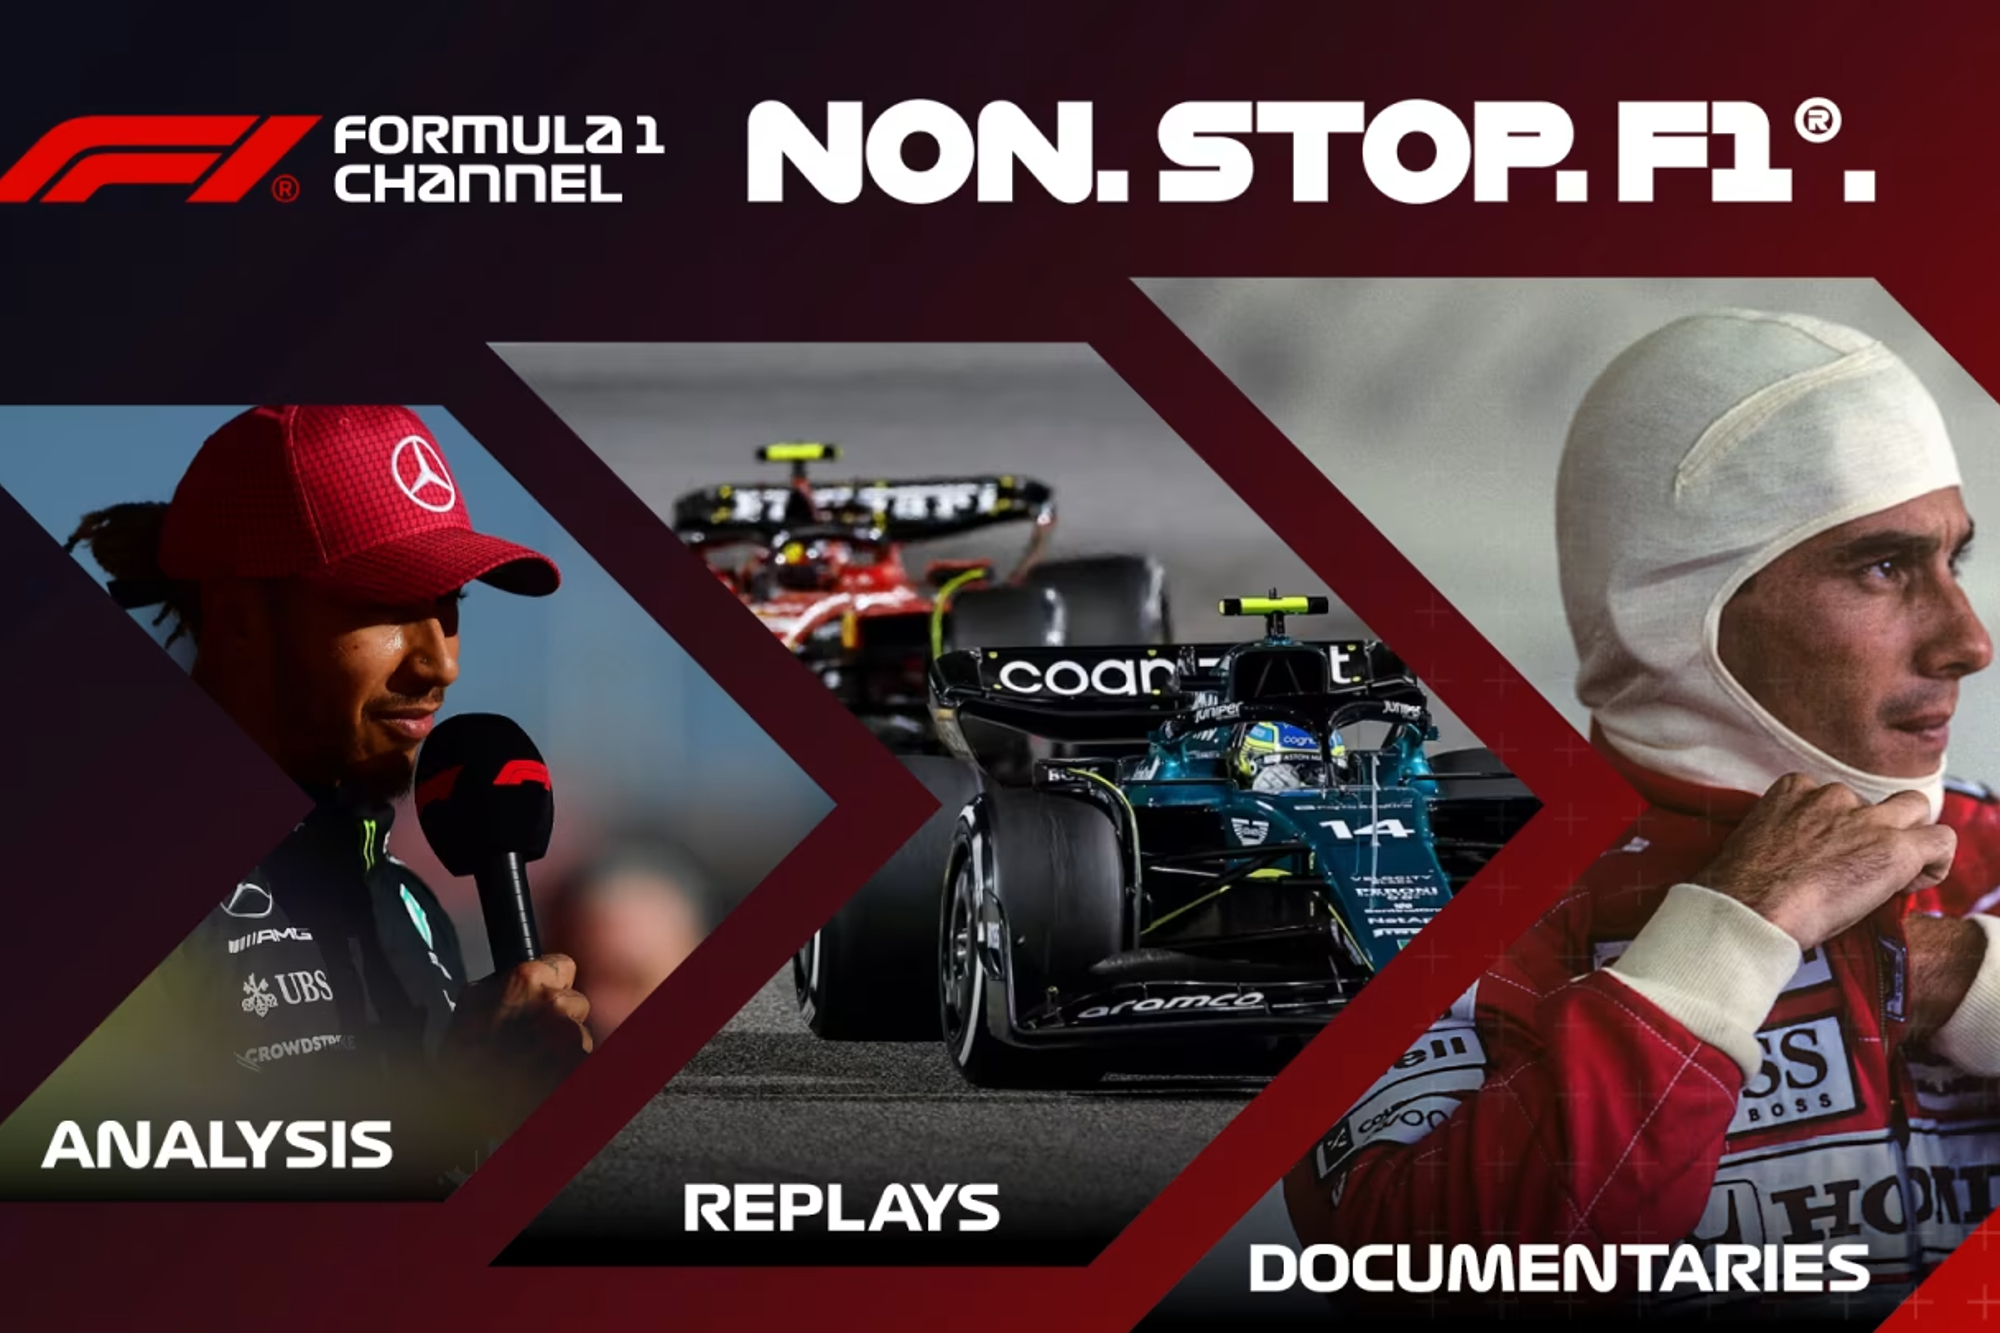 F1 graphics for Formula 1 streaming channel content.